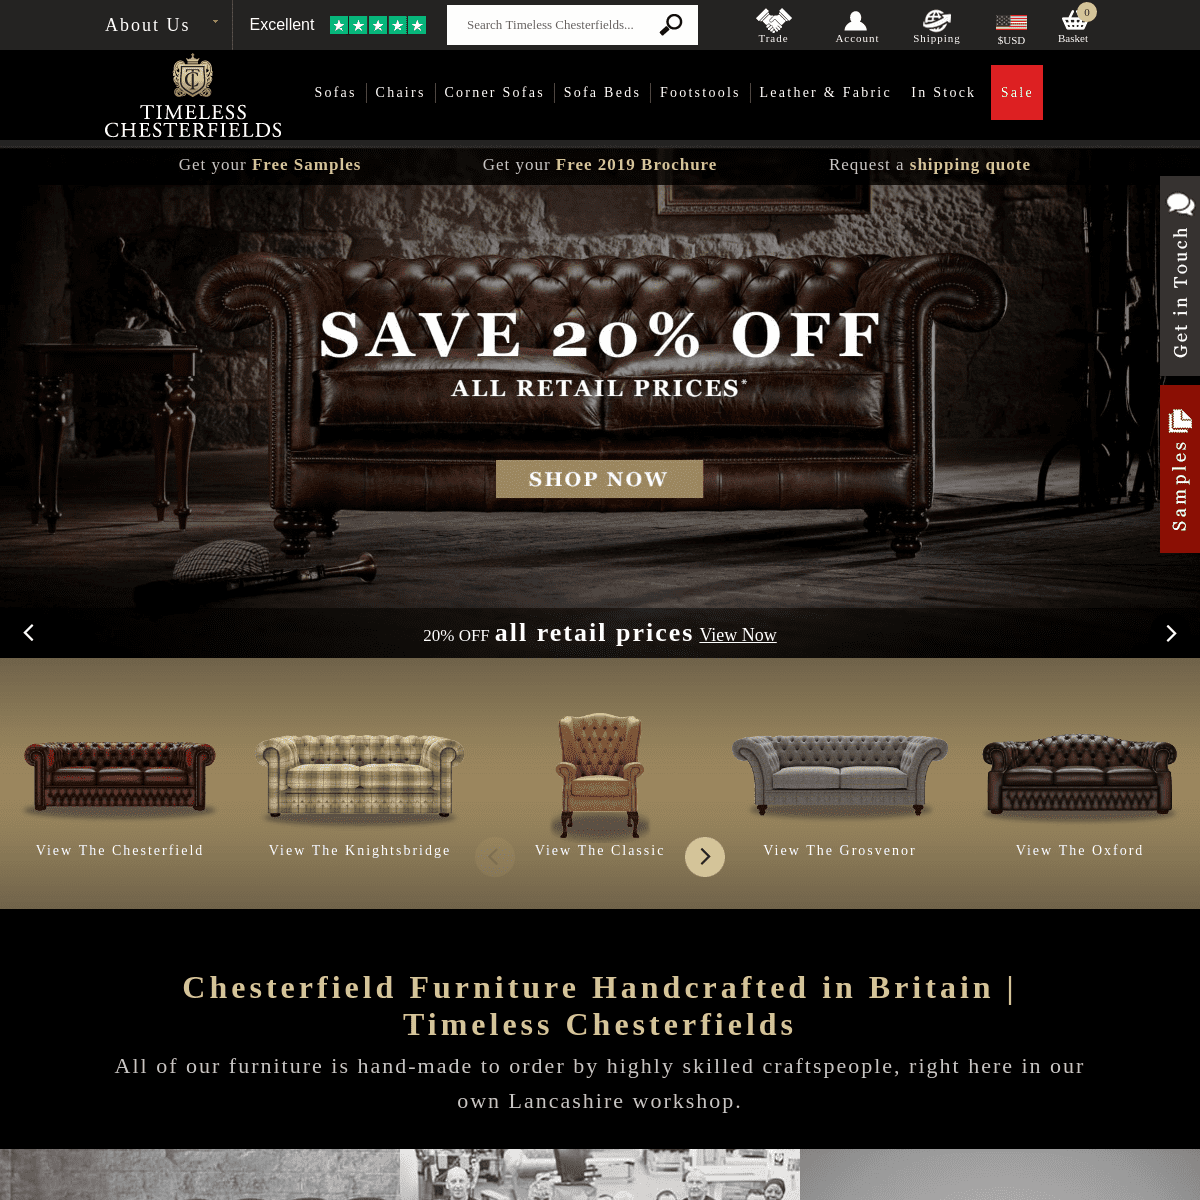 Timeless Chesterfields | Handcrafted, Artisan Furniture